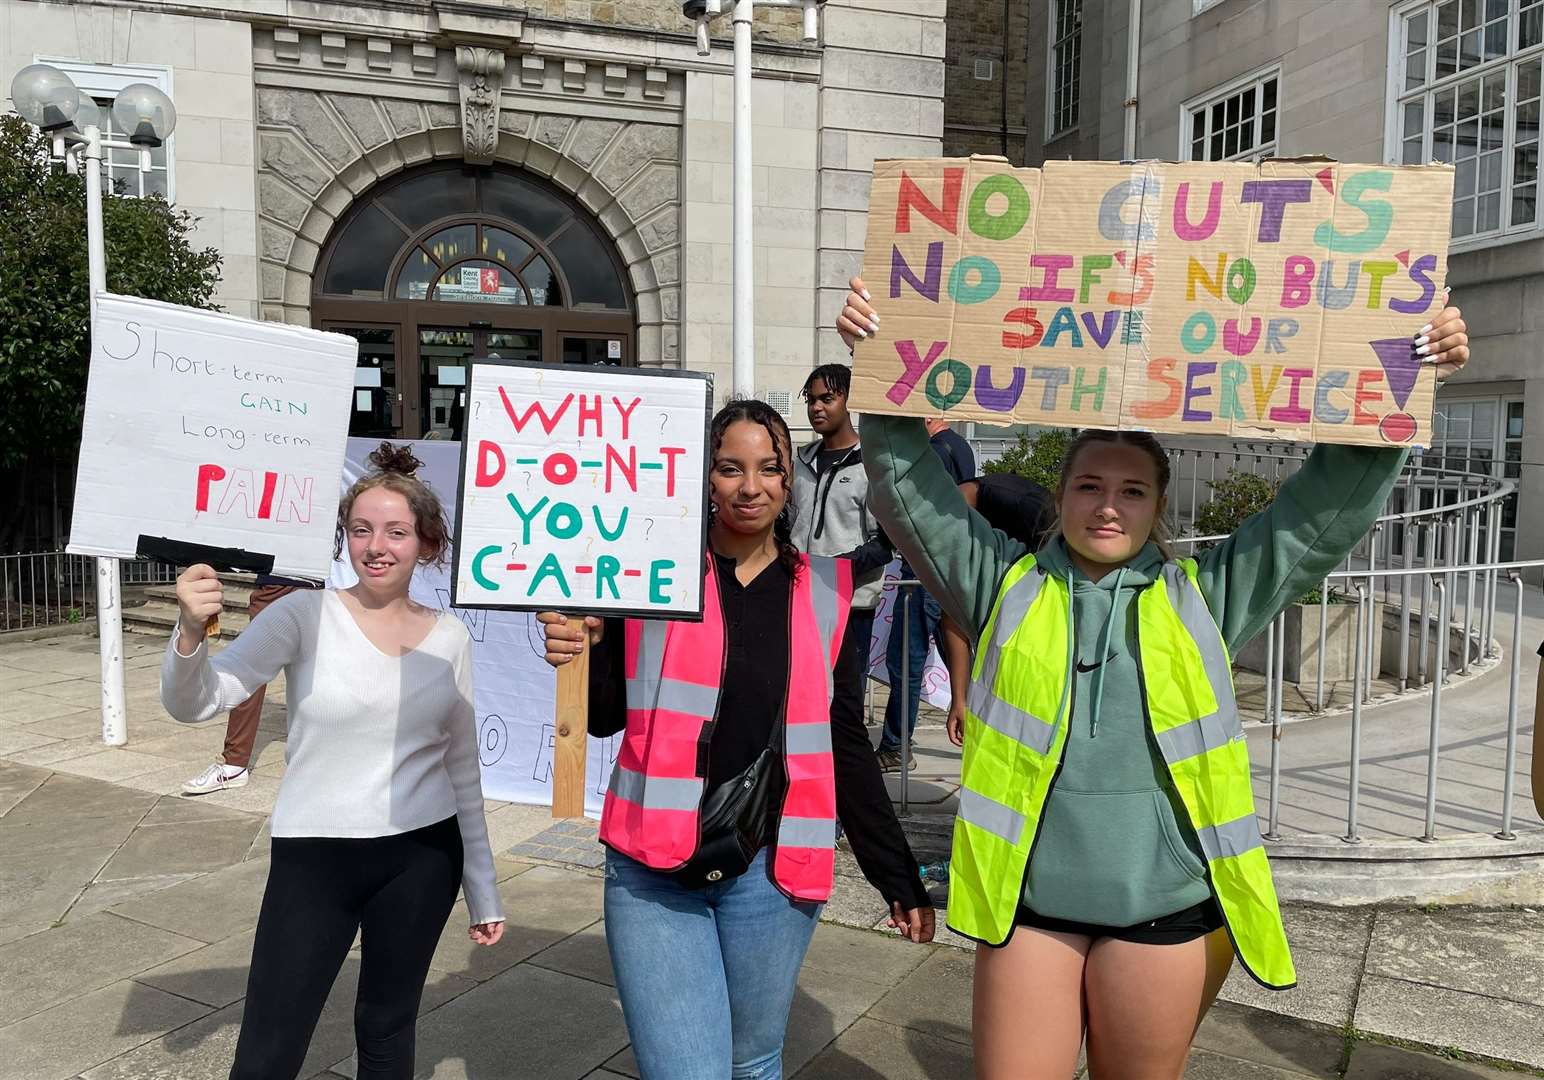 Youth groups protested outside County Hall in Maidstone over proposed cuts